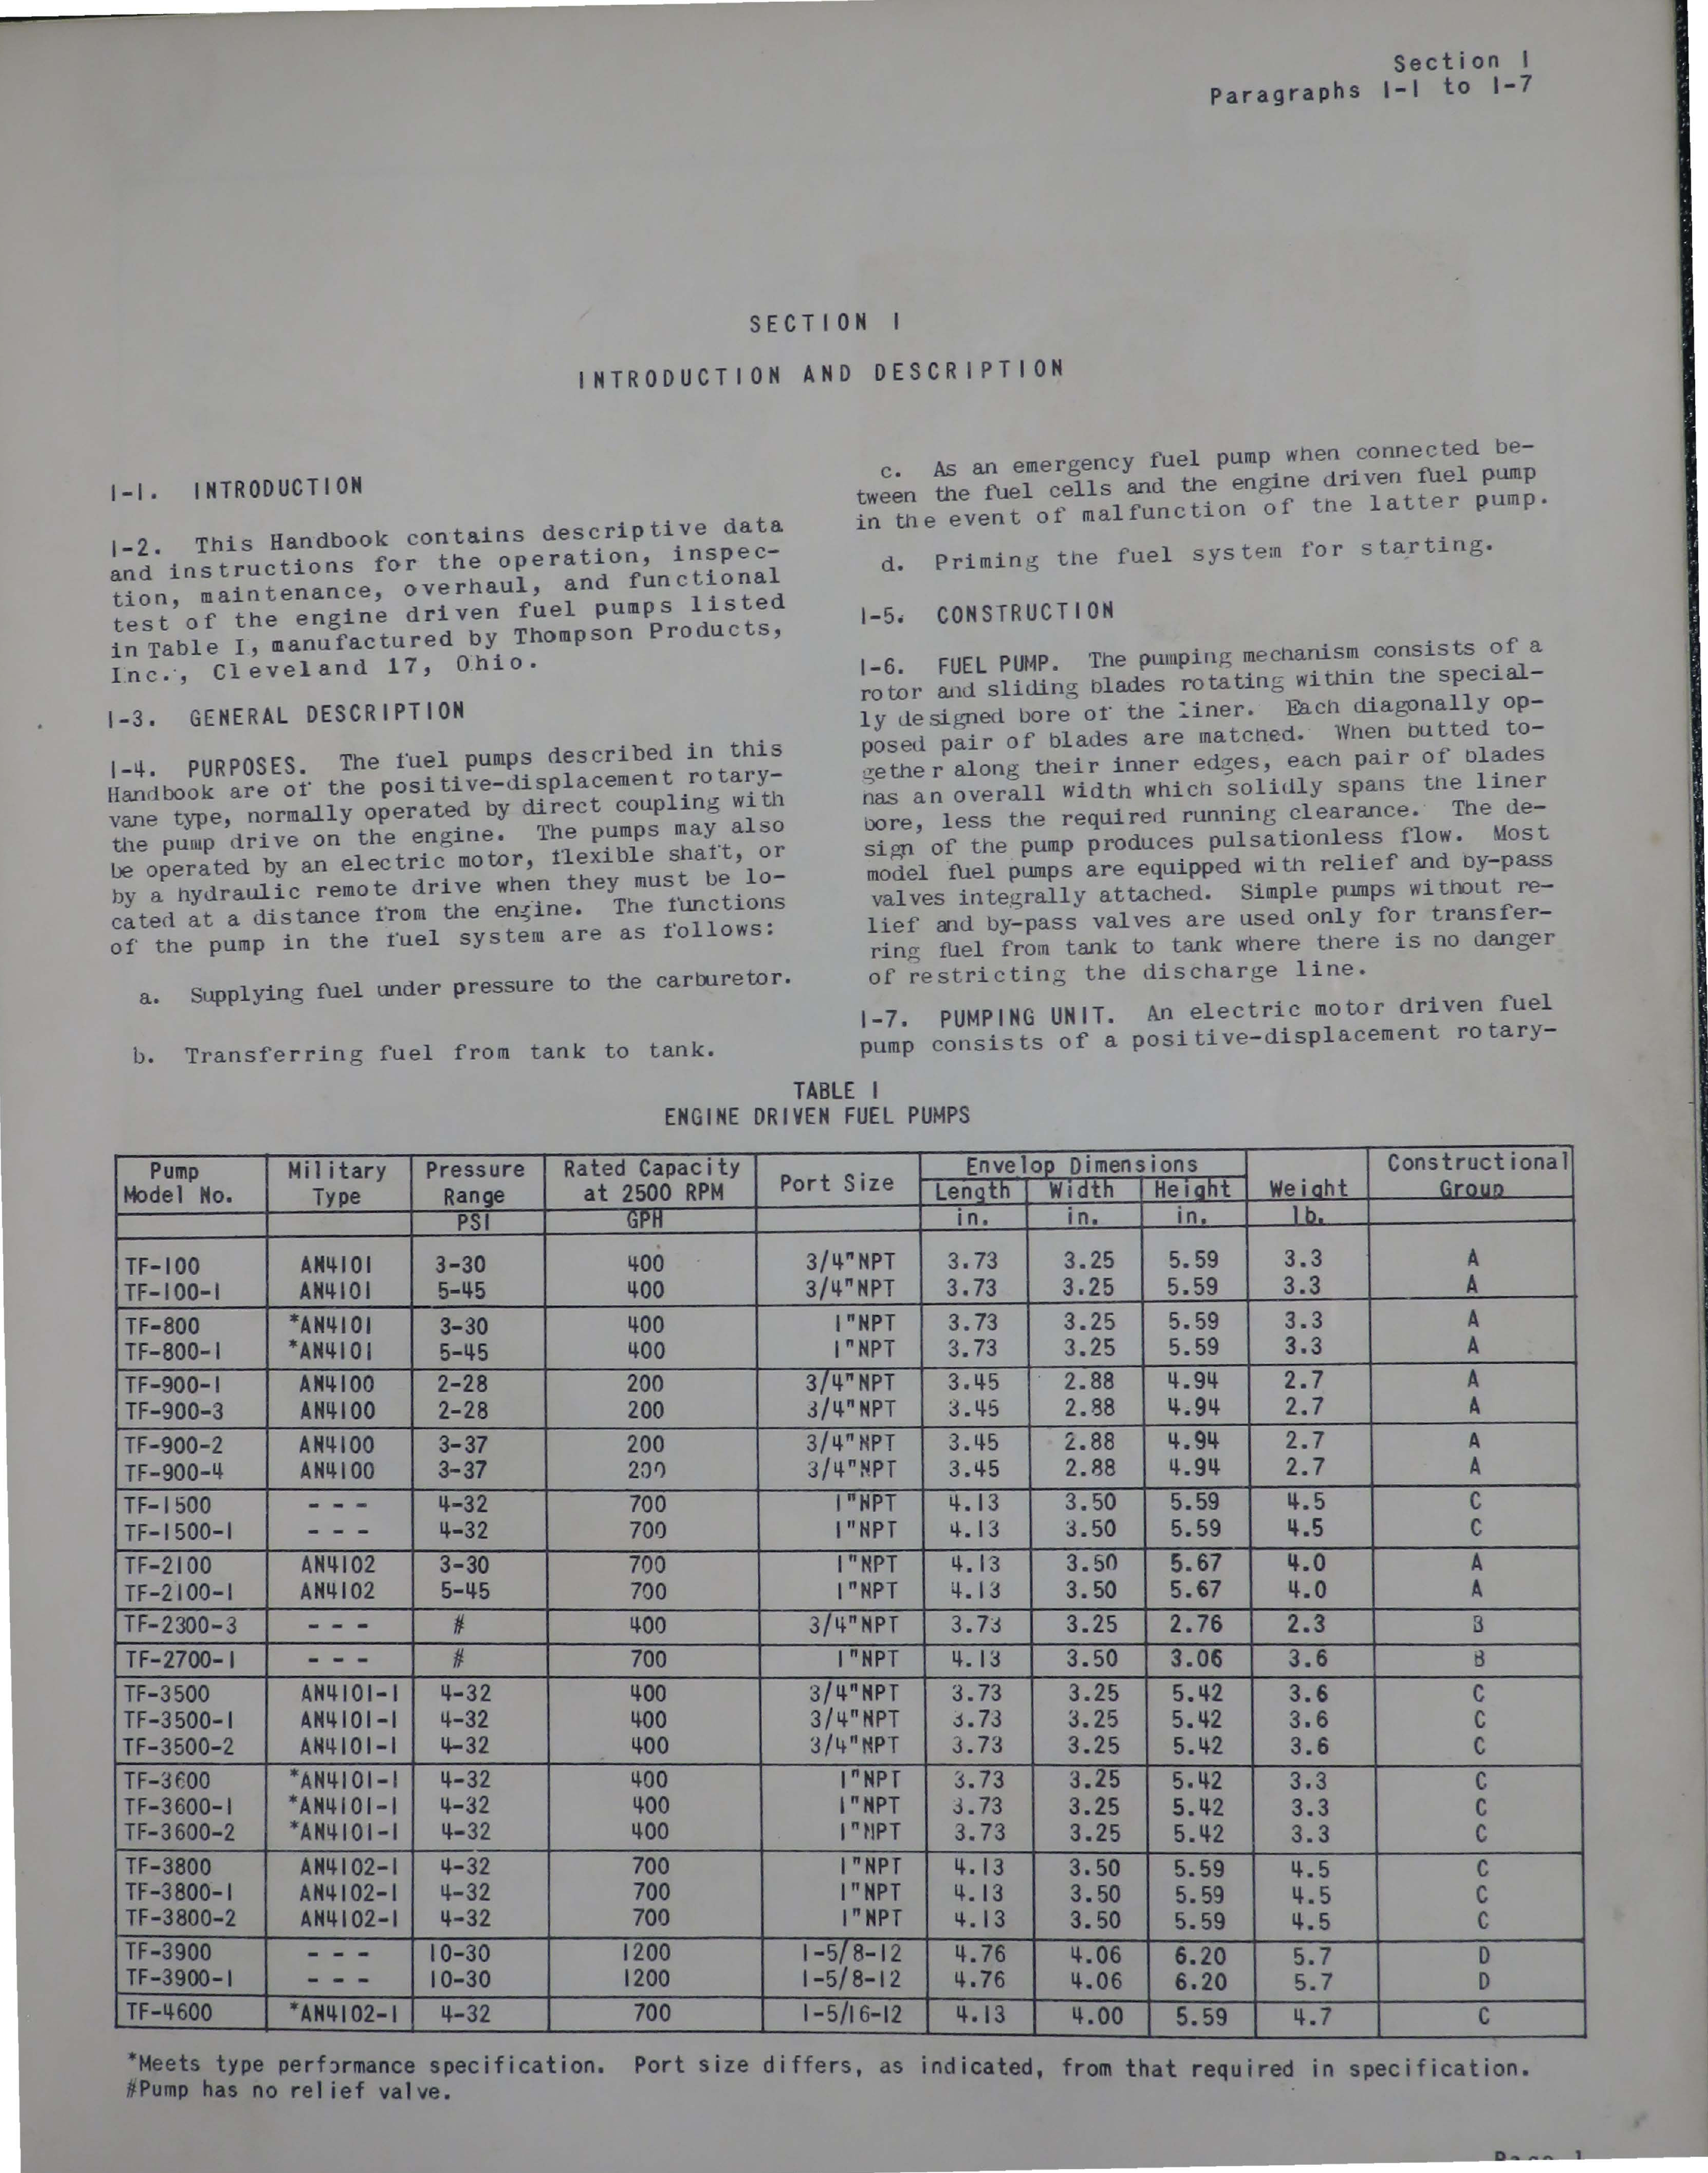 Sample page 5 from AirCorps Library document: Operation, Maintenance and Overhaul for Engine Driven Fuel Pumps 